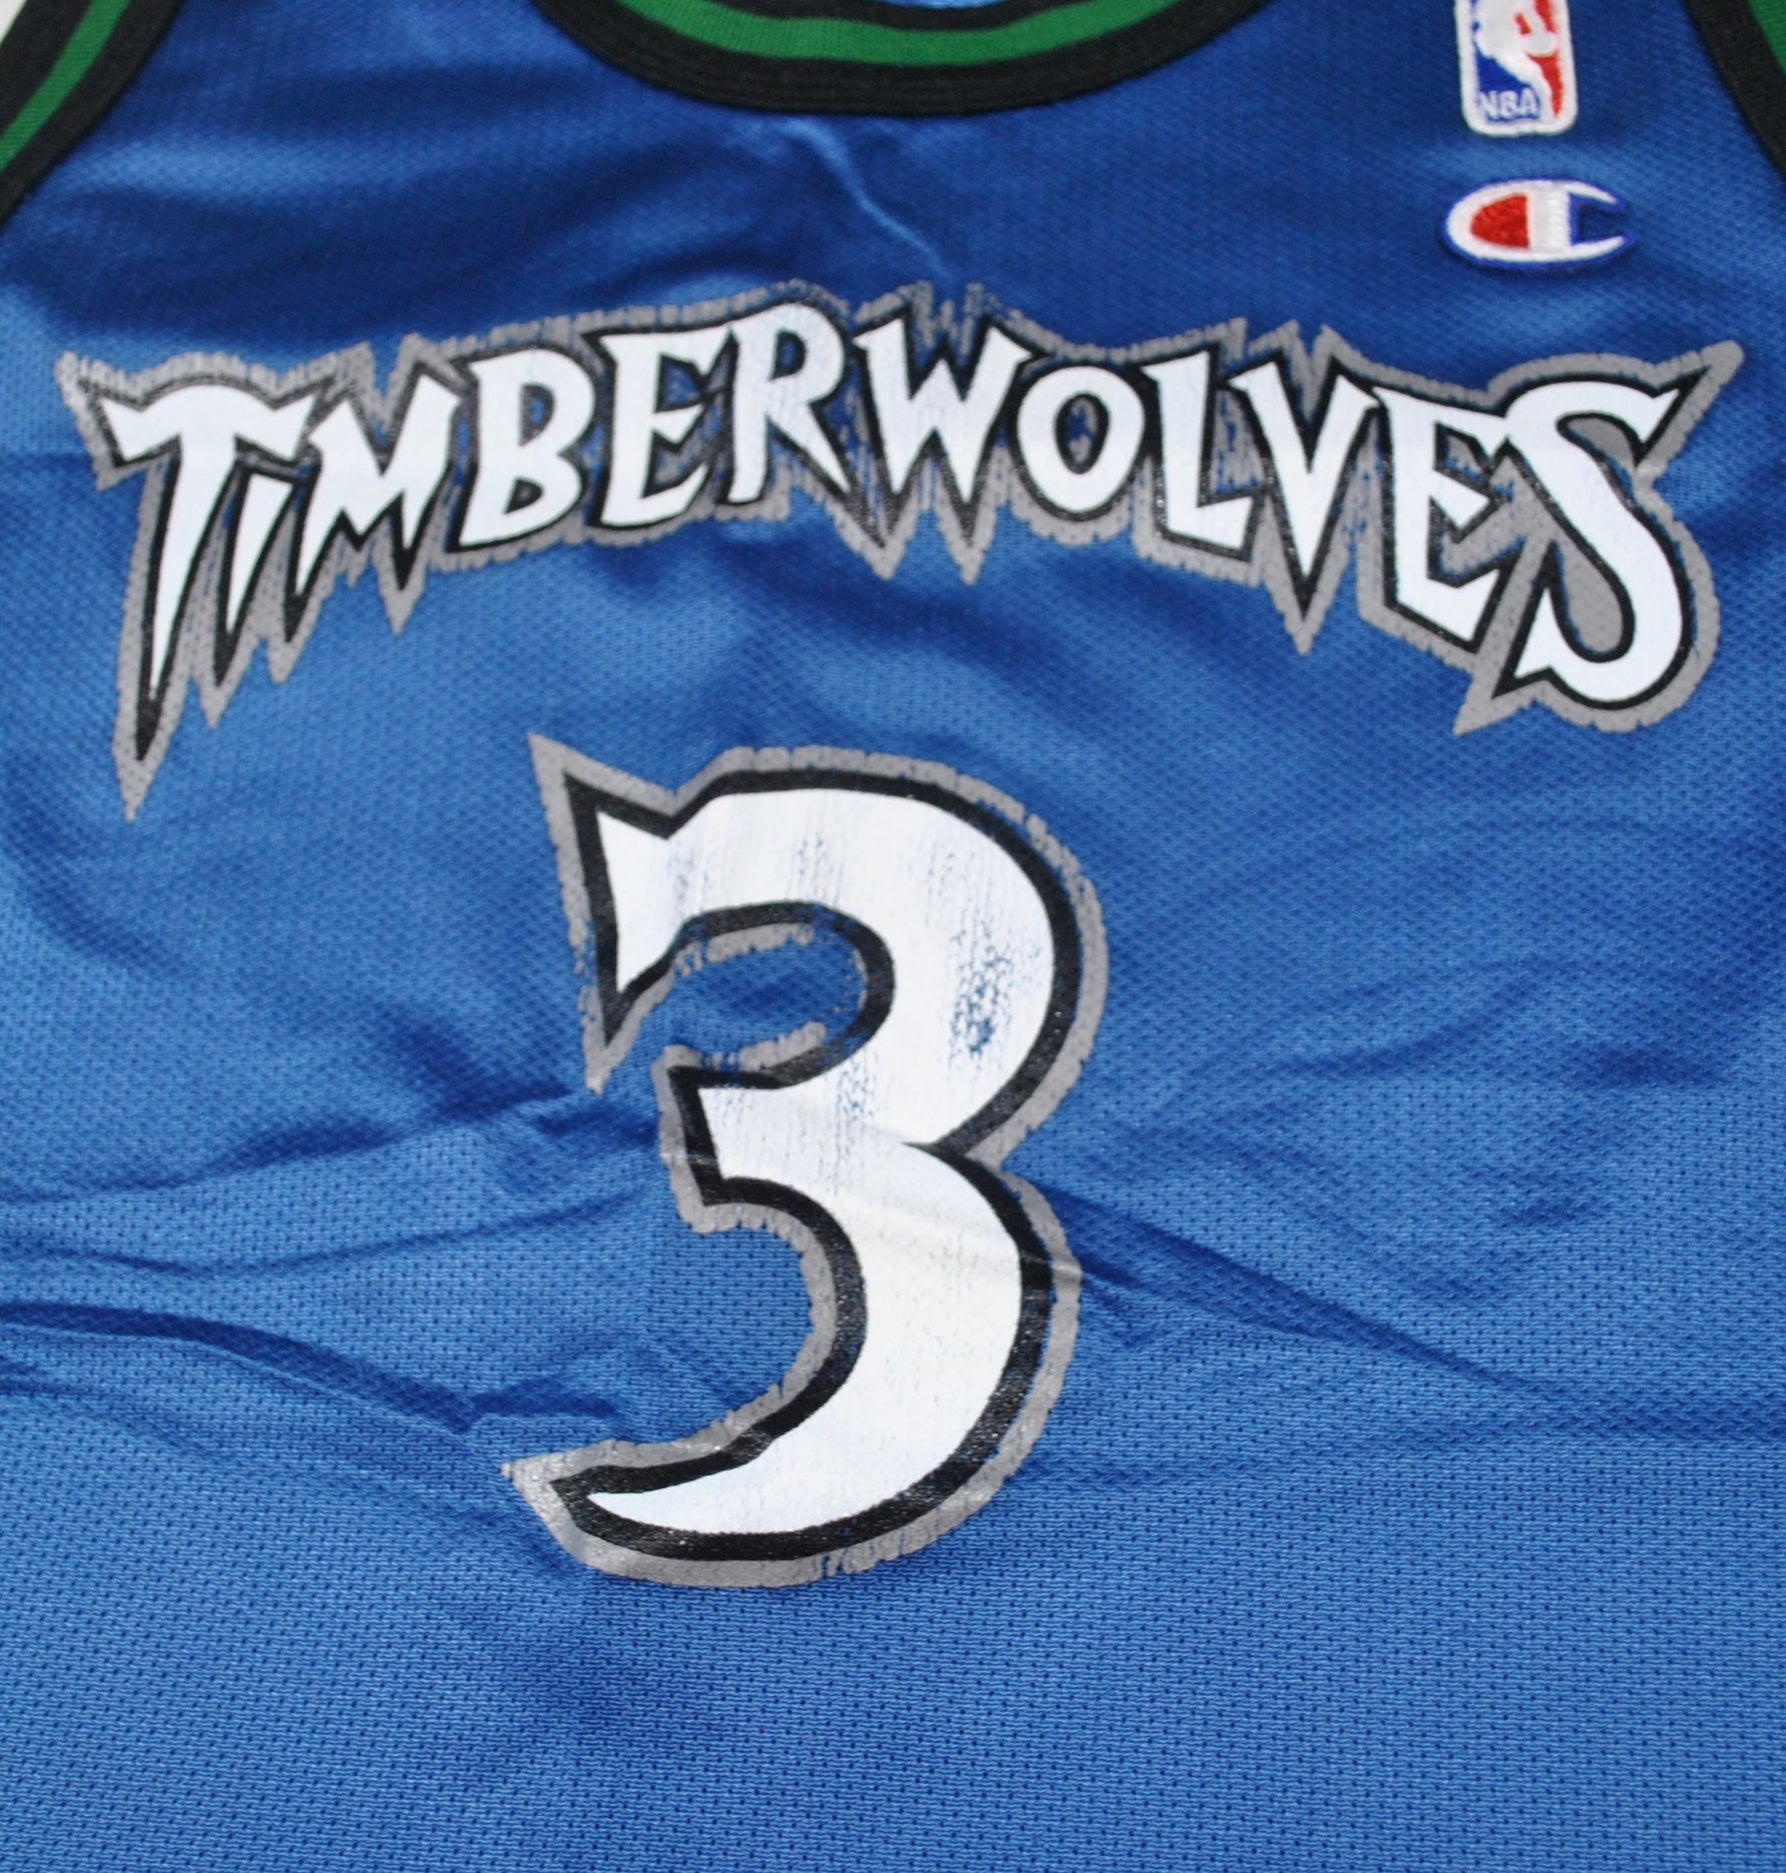 Adidas Stephon Marbury Timberwolves Twolves Jersey for Sale in Aloma, FL -  OfferUp